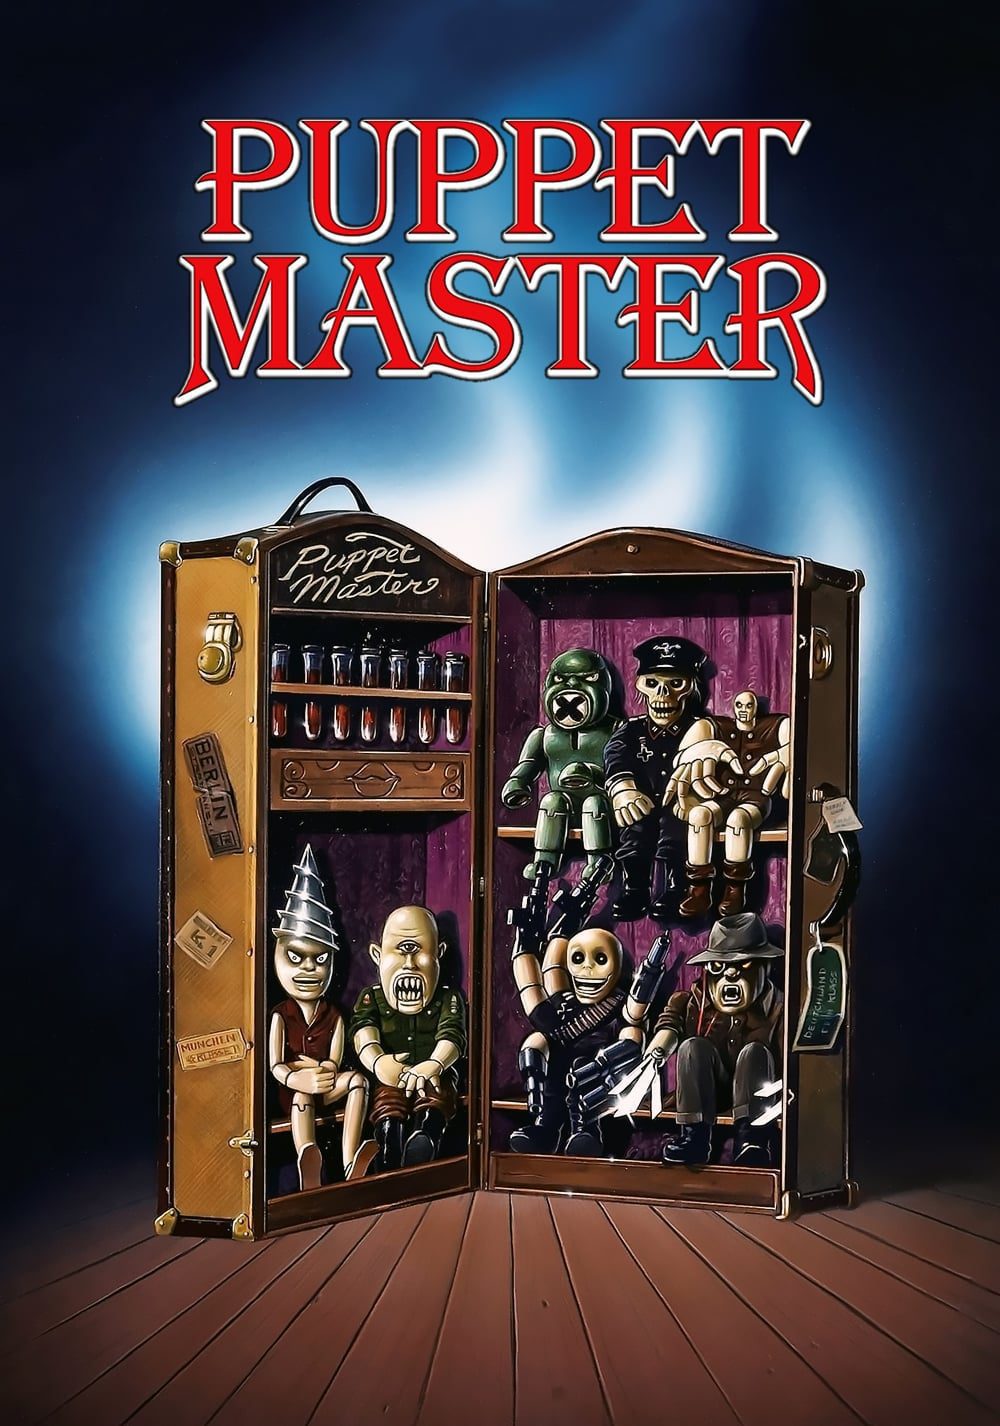 Puppet Master Streaming Now